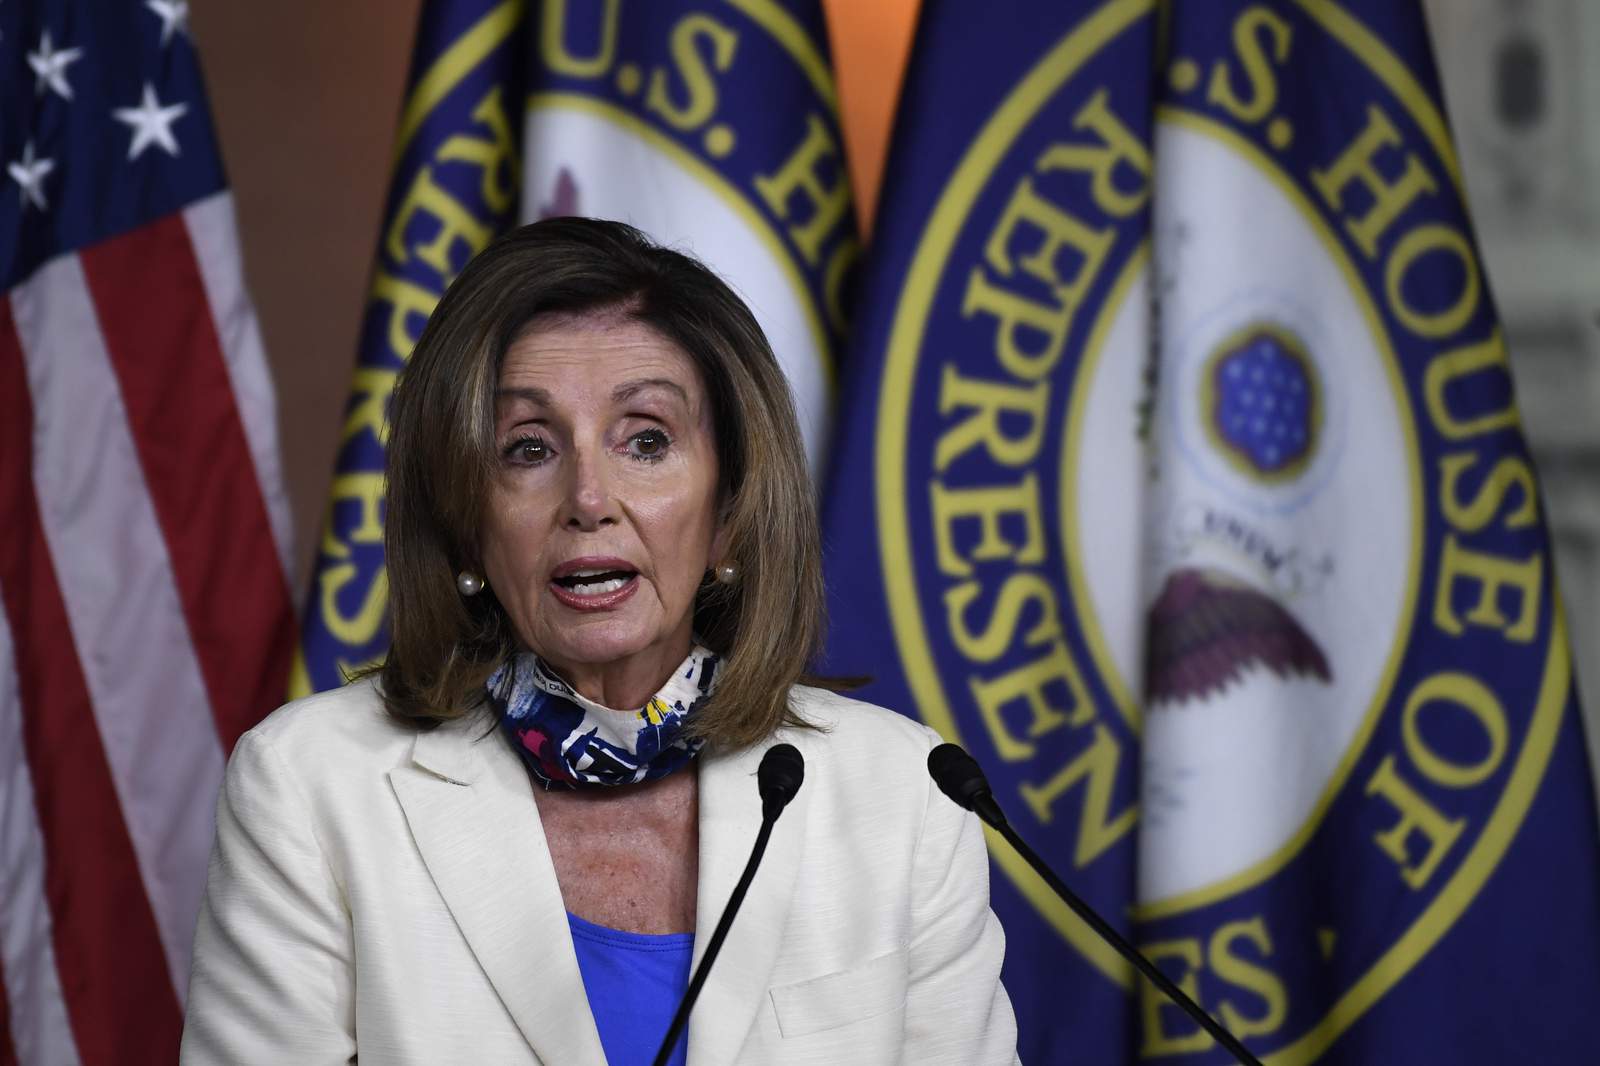 Pelosi says John Lewis 'worked on the side of the angels'